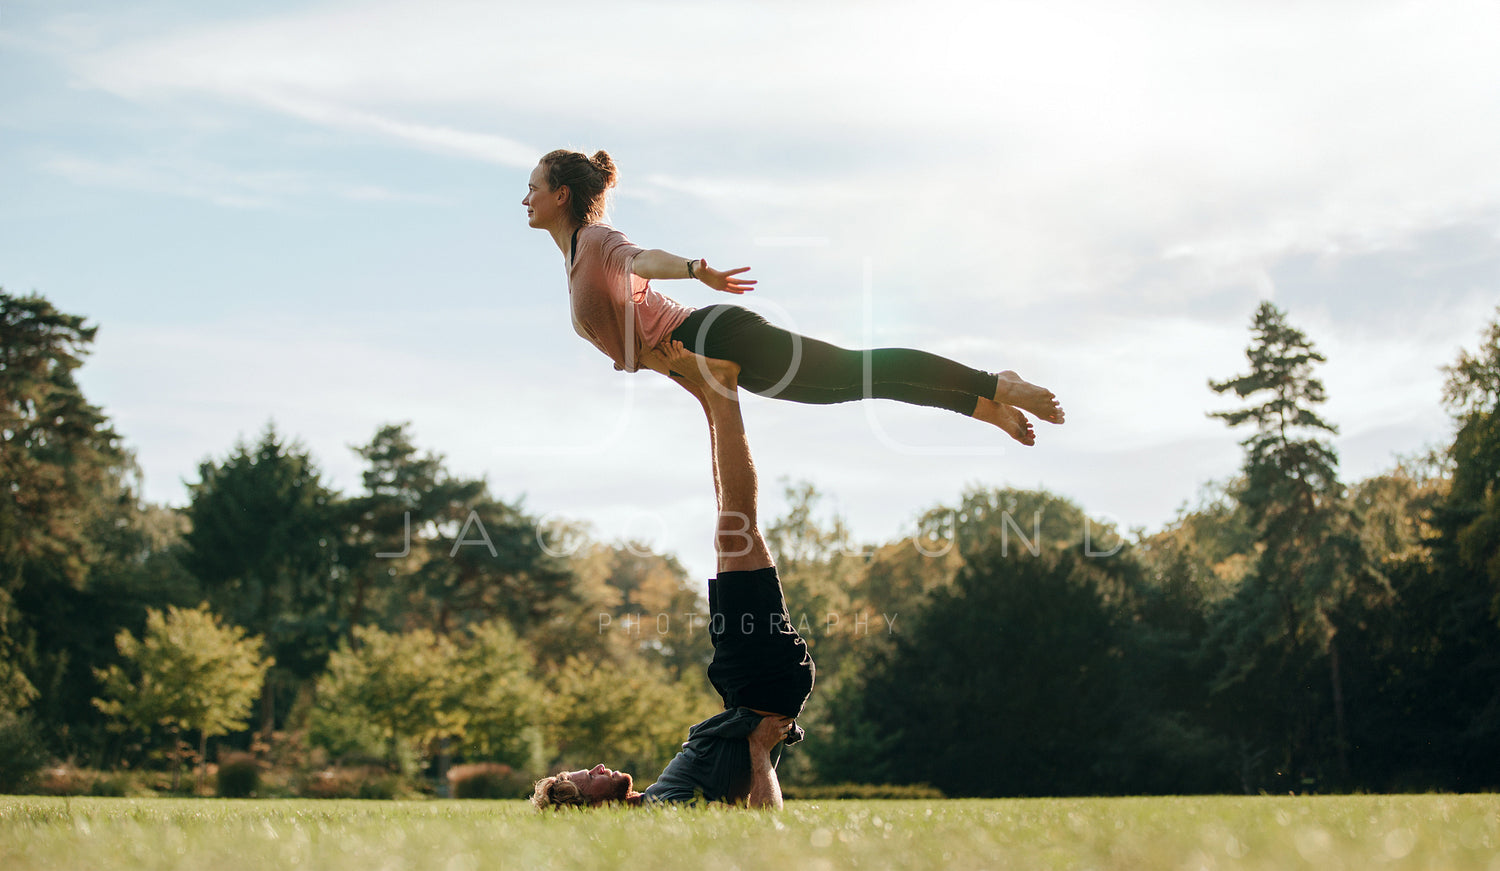 Easy Yoga Poses For Two People - Beginners Guide To Couples Yoga | Yoga  poses for two, Two people yoga poses, Yoga poses photography